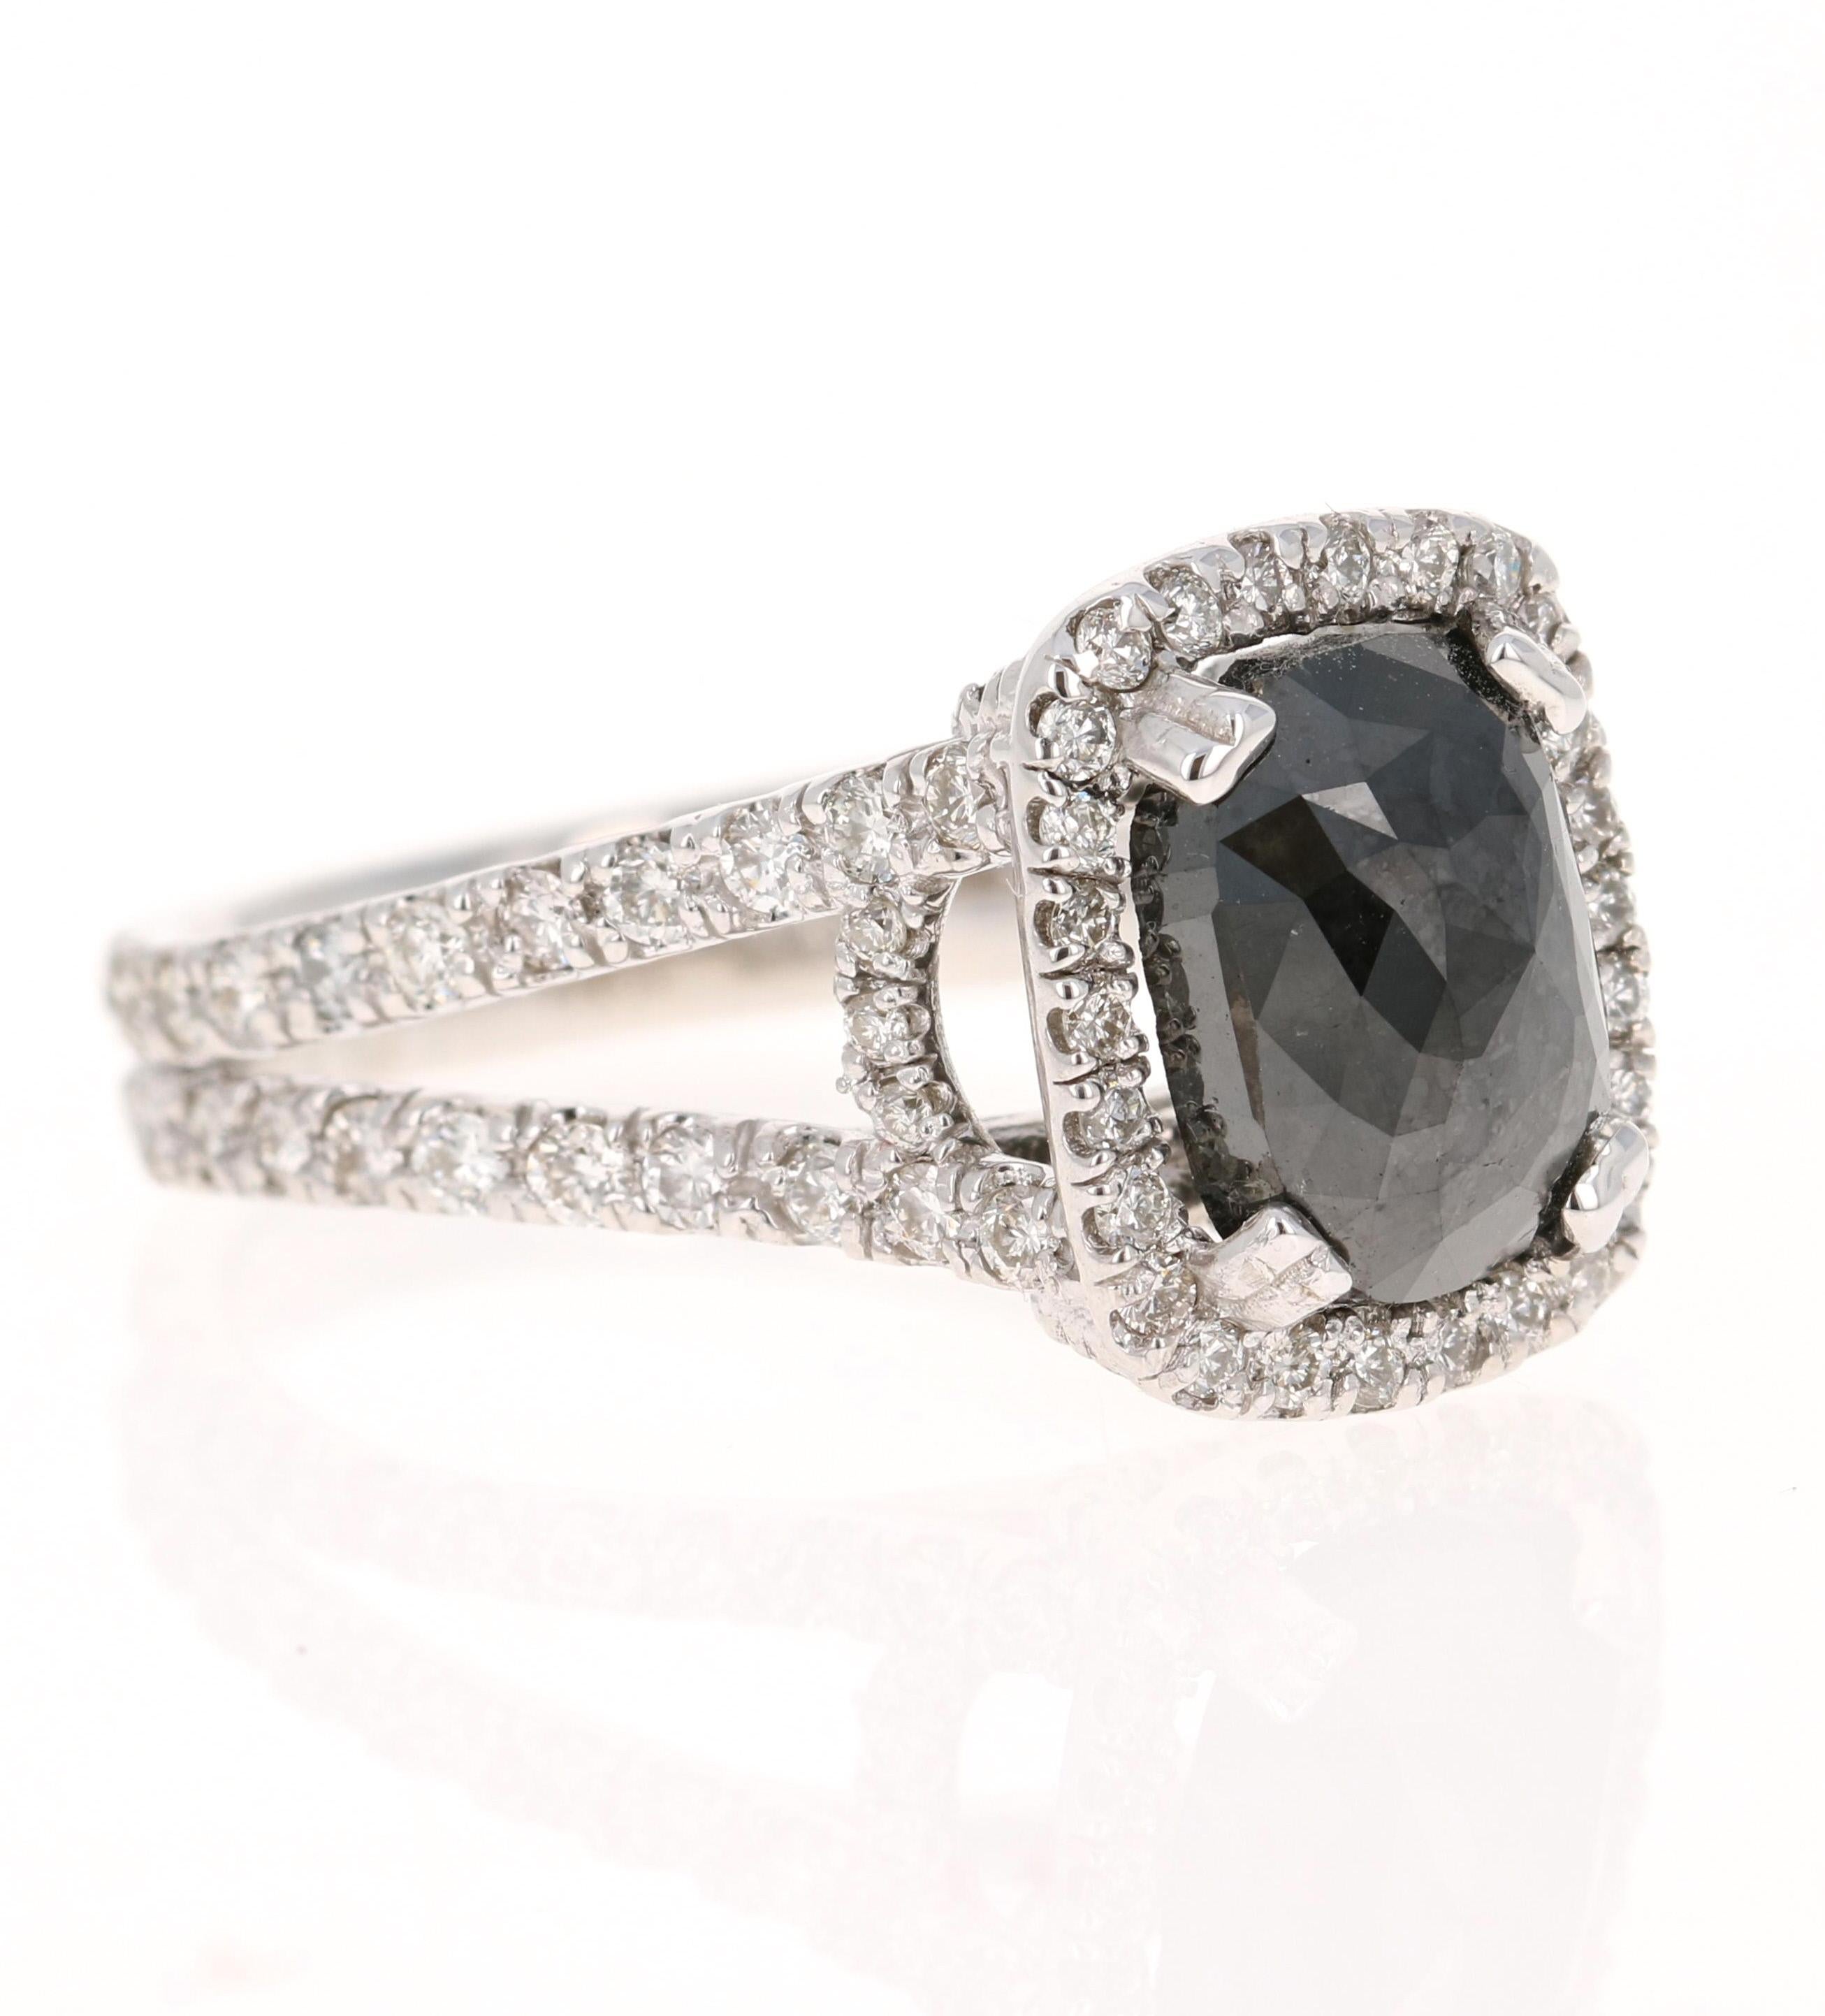 The Rectangular Cushion Cut Black Diamond is 3.84 Carats and is surrounded by 88 Round Cut Diamonds weighing 1.35 Carats. (Clarity: VS, Color: H) The total carat weight of the ring is 5.19 Carats. 

It is beautifully set in 14 Karat White Gold and